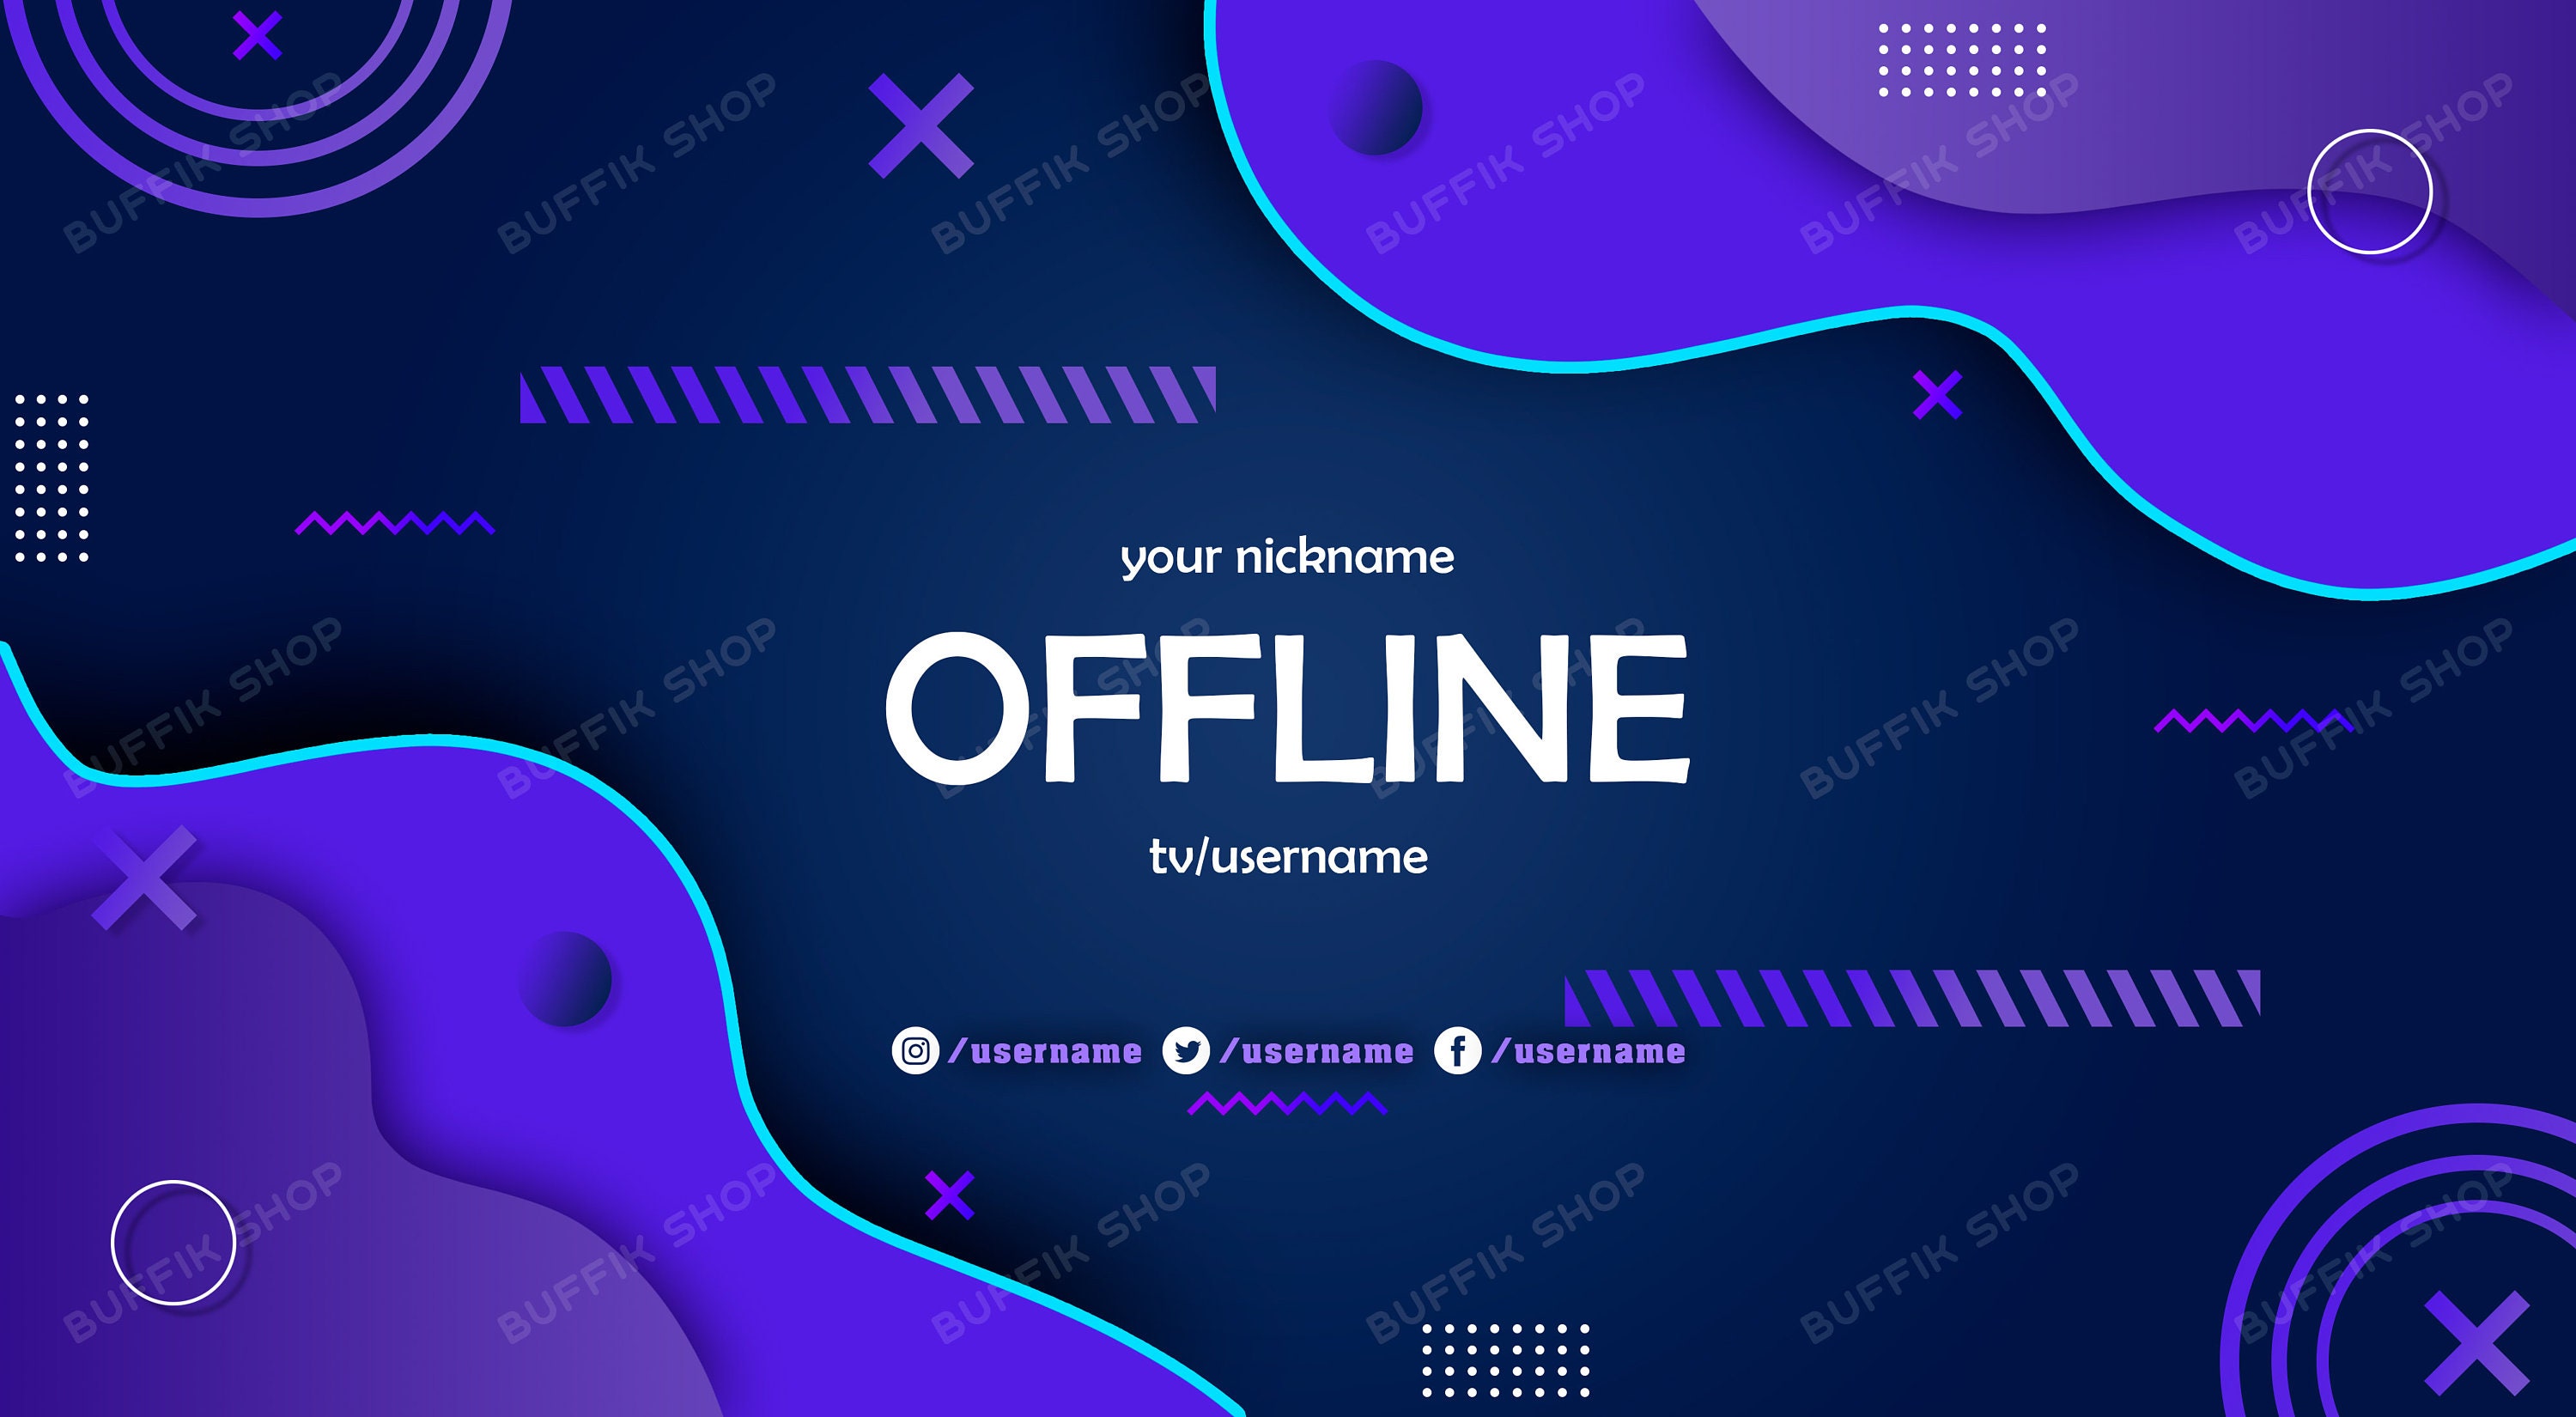 5x Cute Twitch Overlays for Stream Aesthetic Red Offline,starting ...